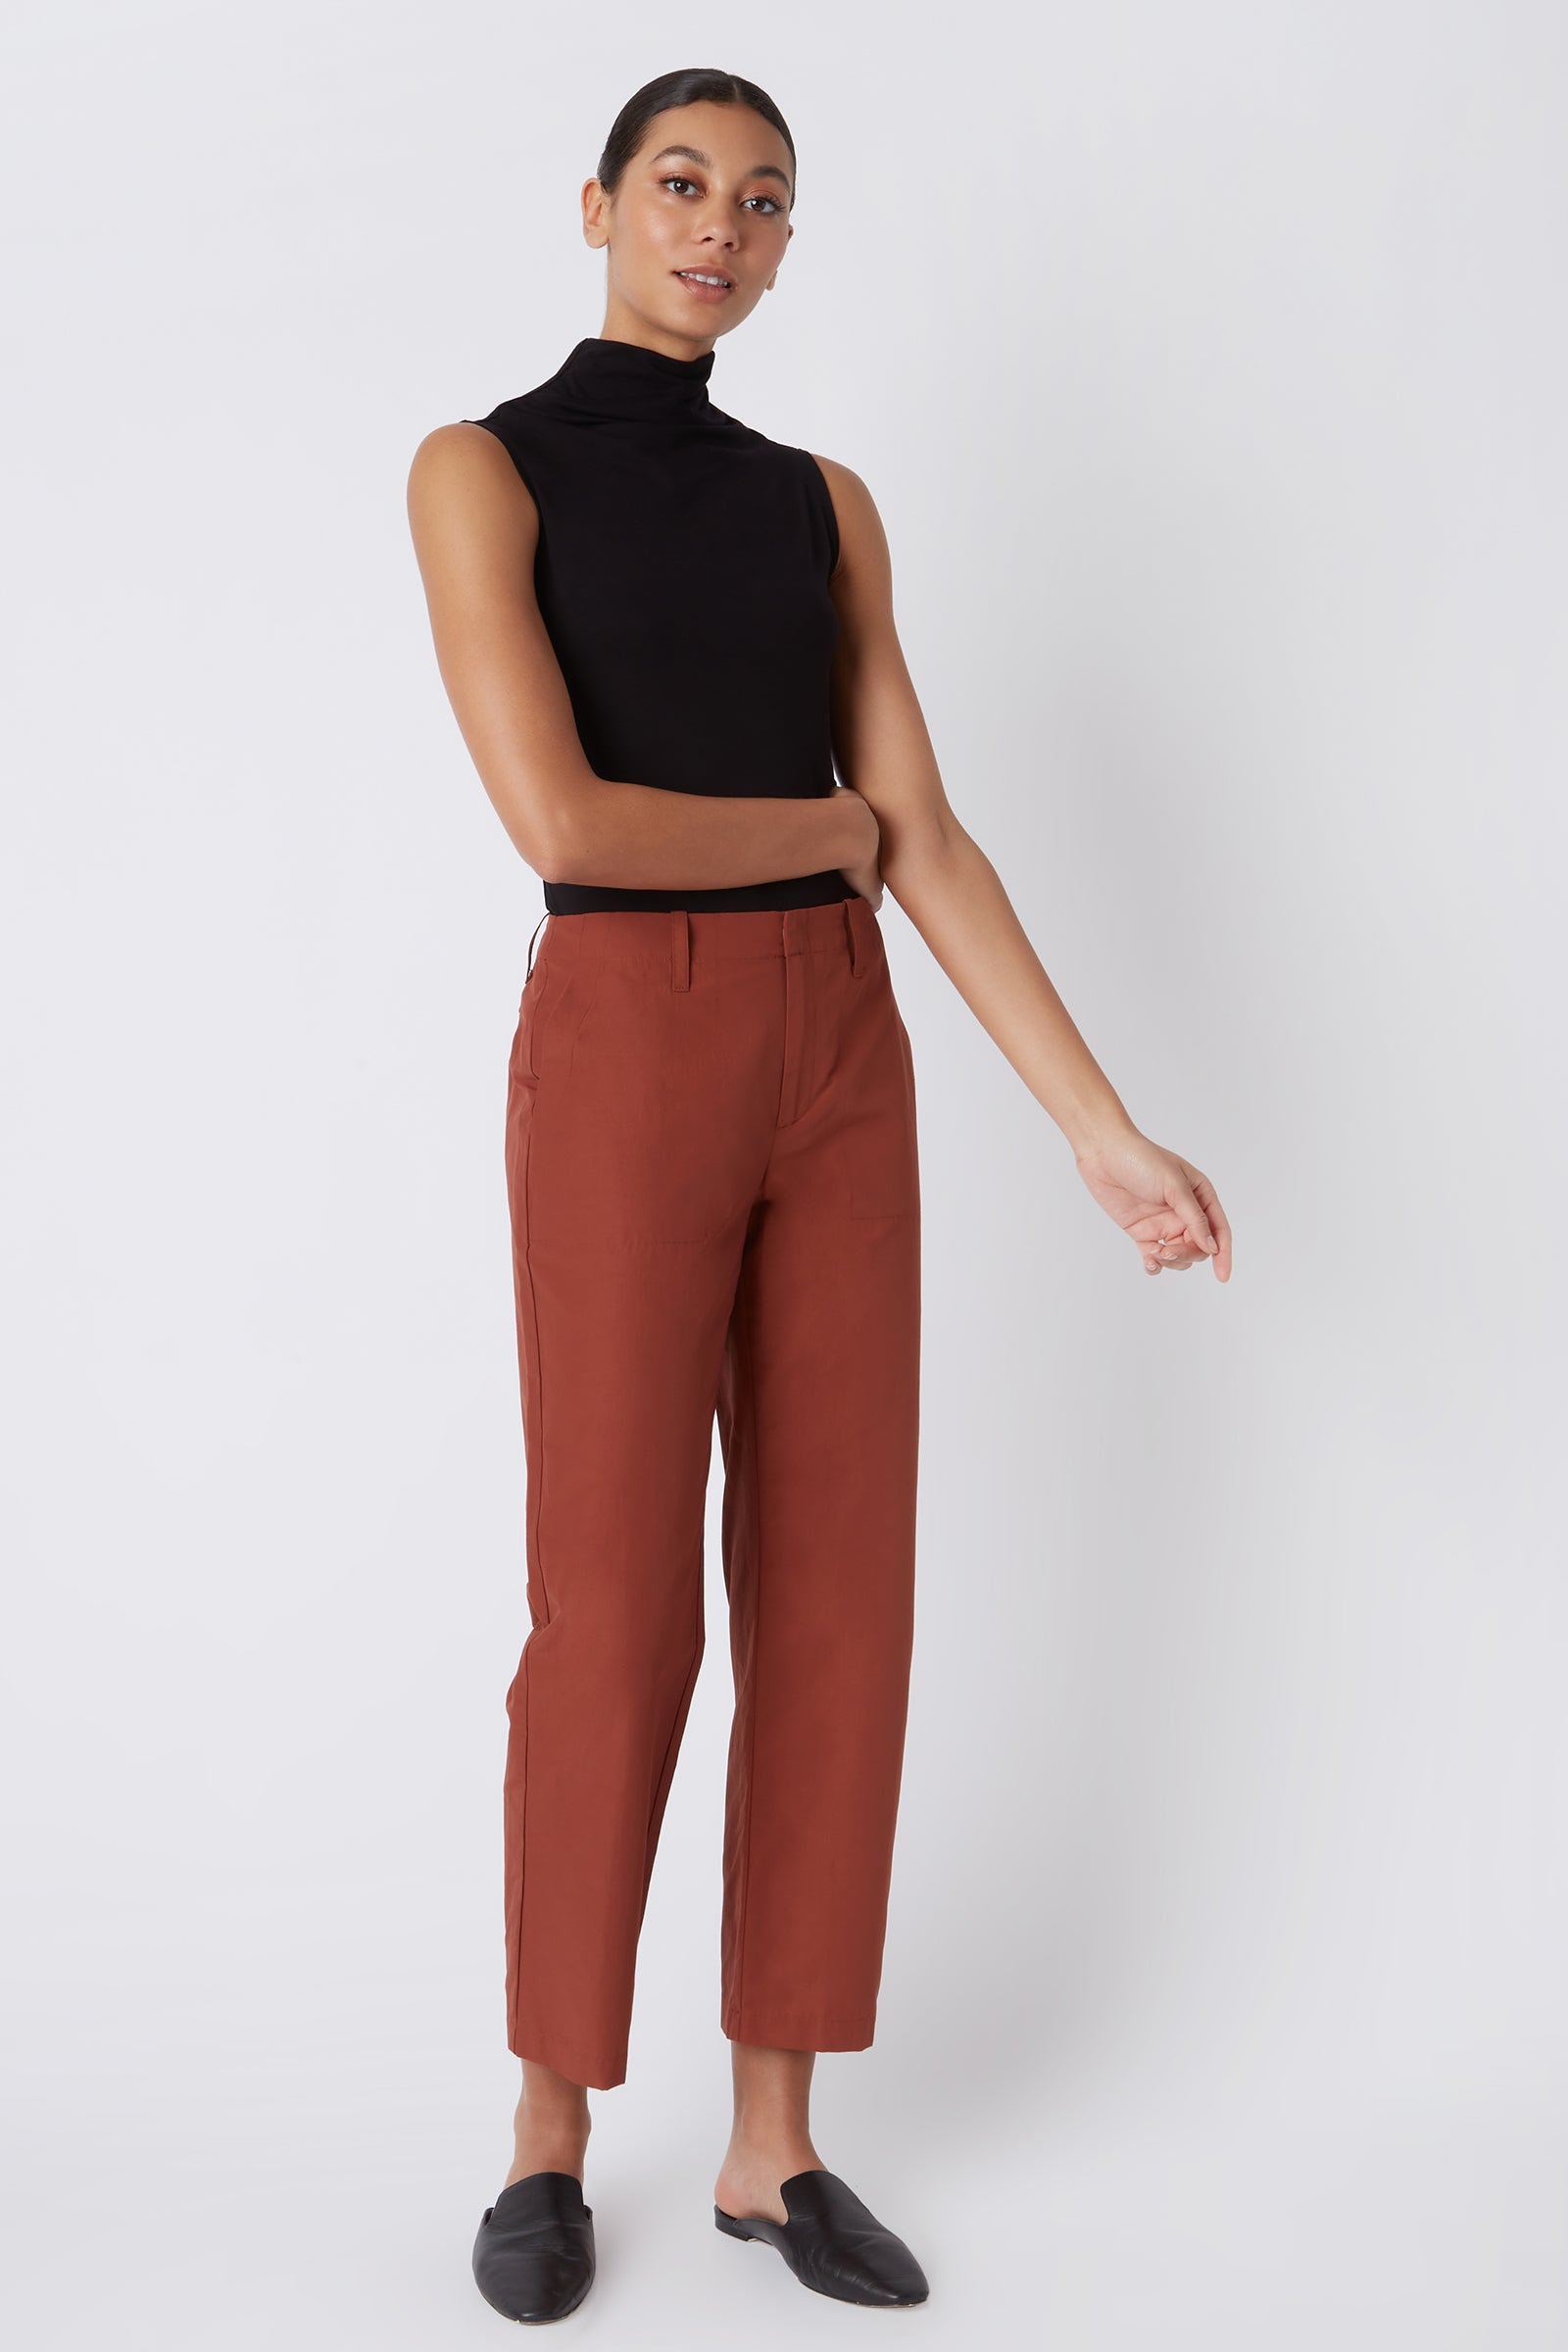 Kal Rieman Francoise Cigarette Pant in Rust Italian Broadcloth on Model with Arm Across Body Full Front Side View